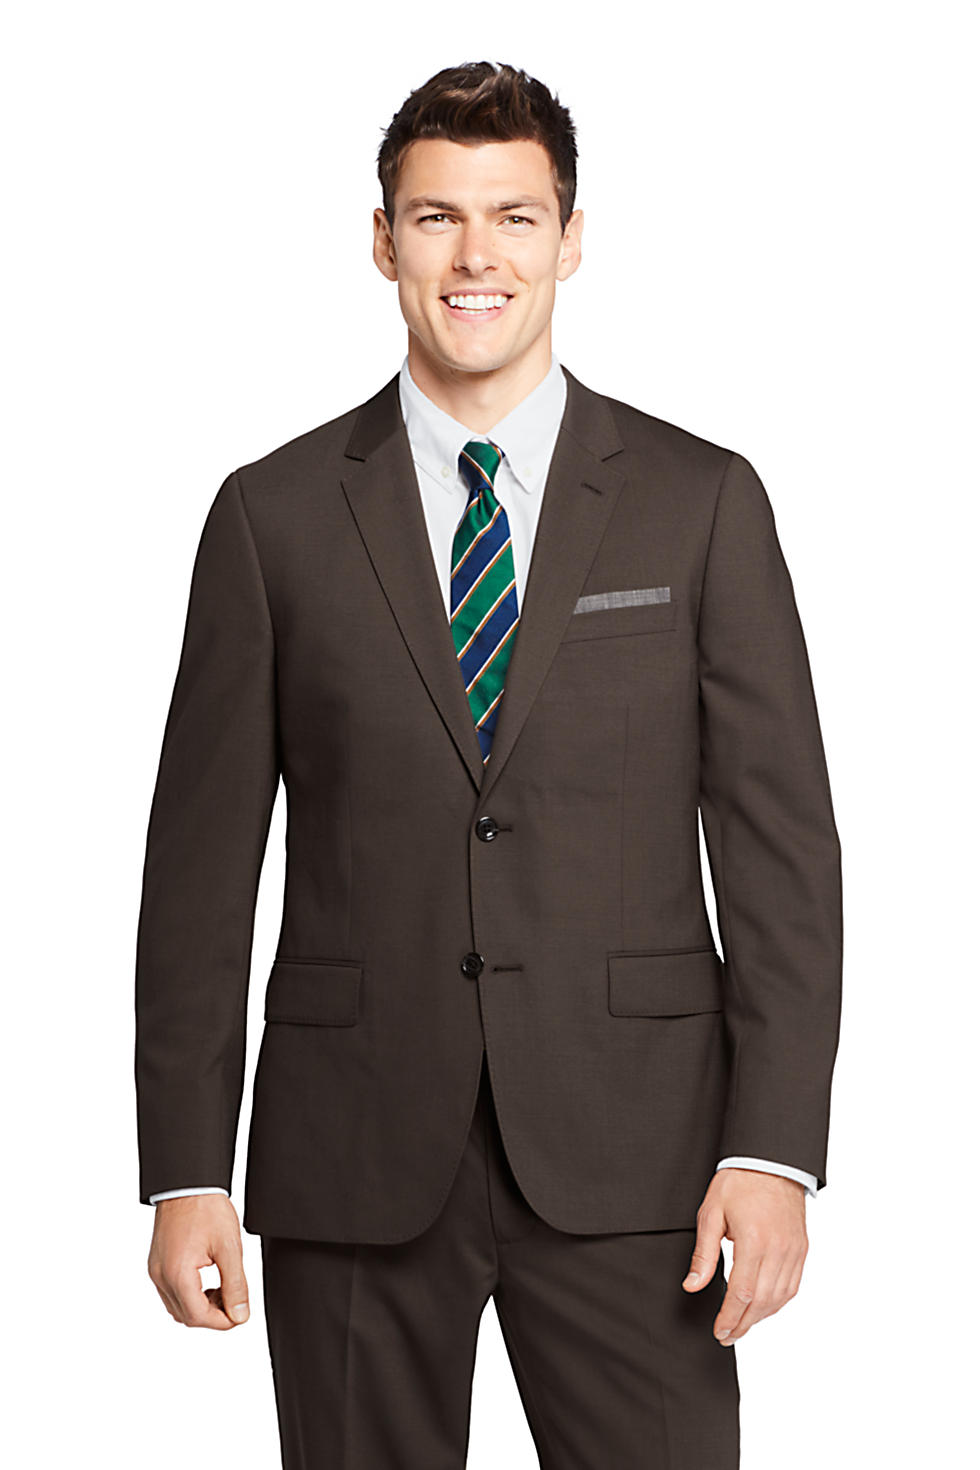 Lands End Men's Tailored Fit Comfort First Year'rounder Suit Jacket (in 3 colors)